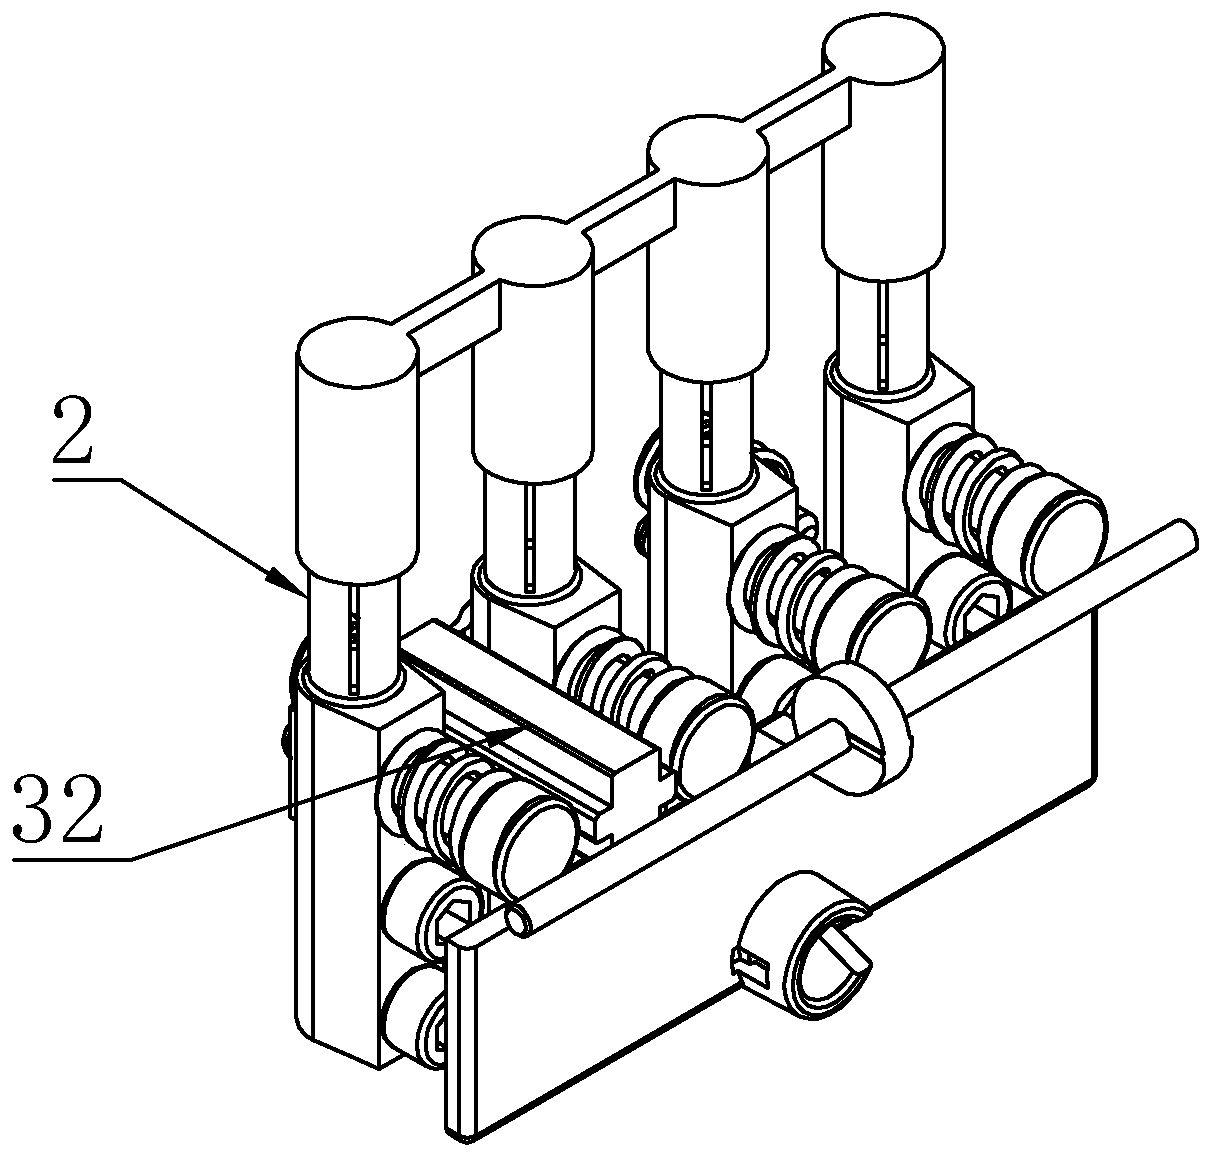 Connector capable of realizing replacement of electric energy meter without interrupting power supply